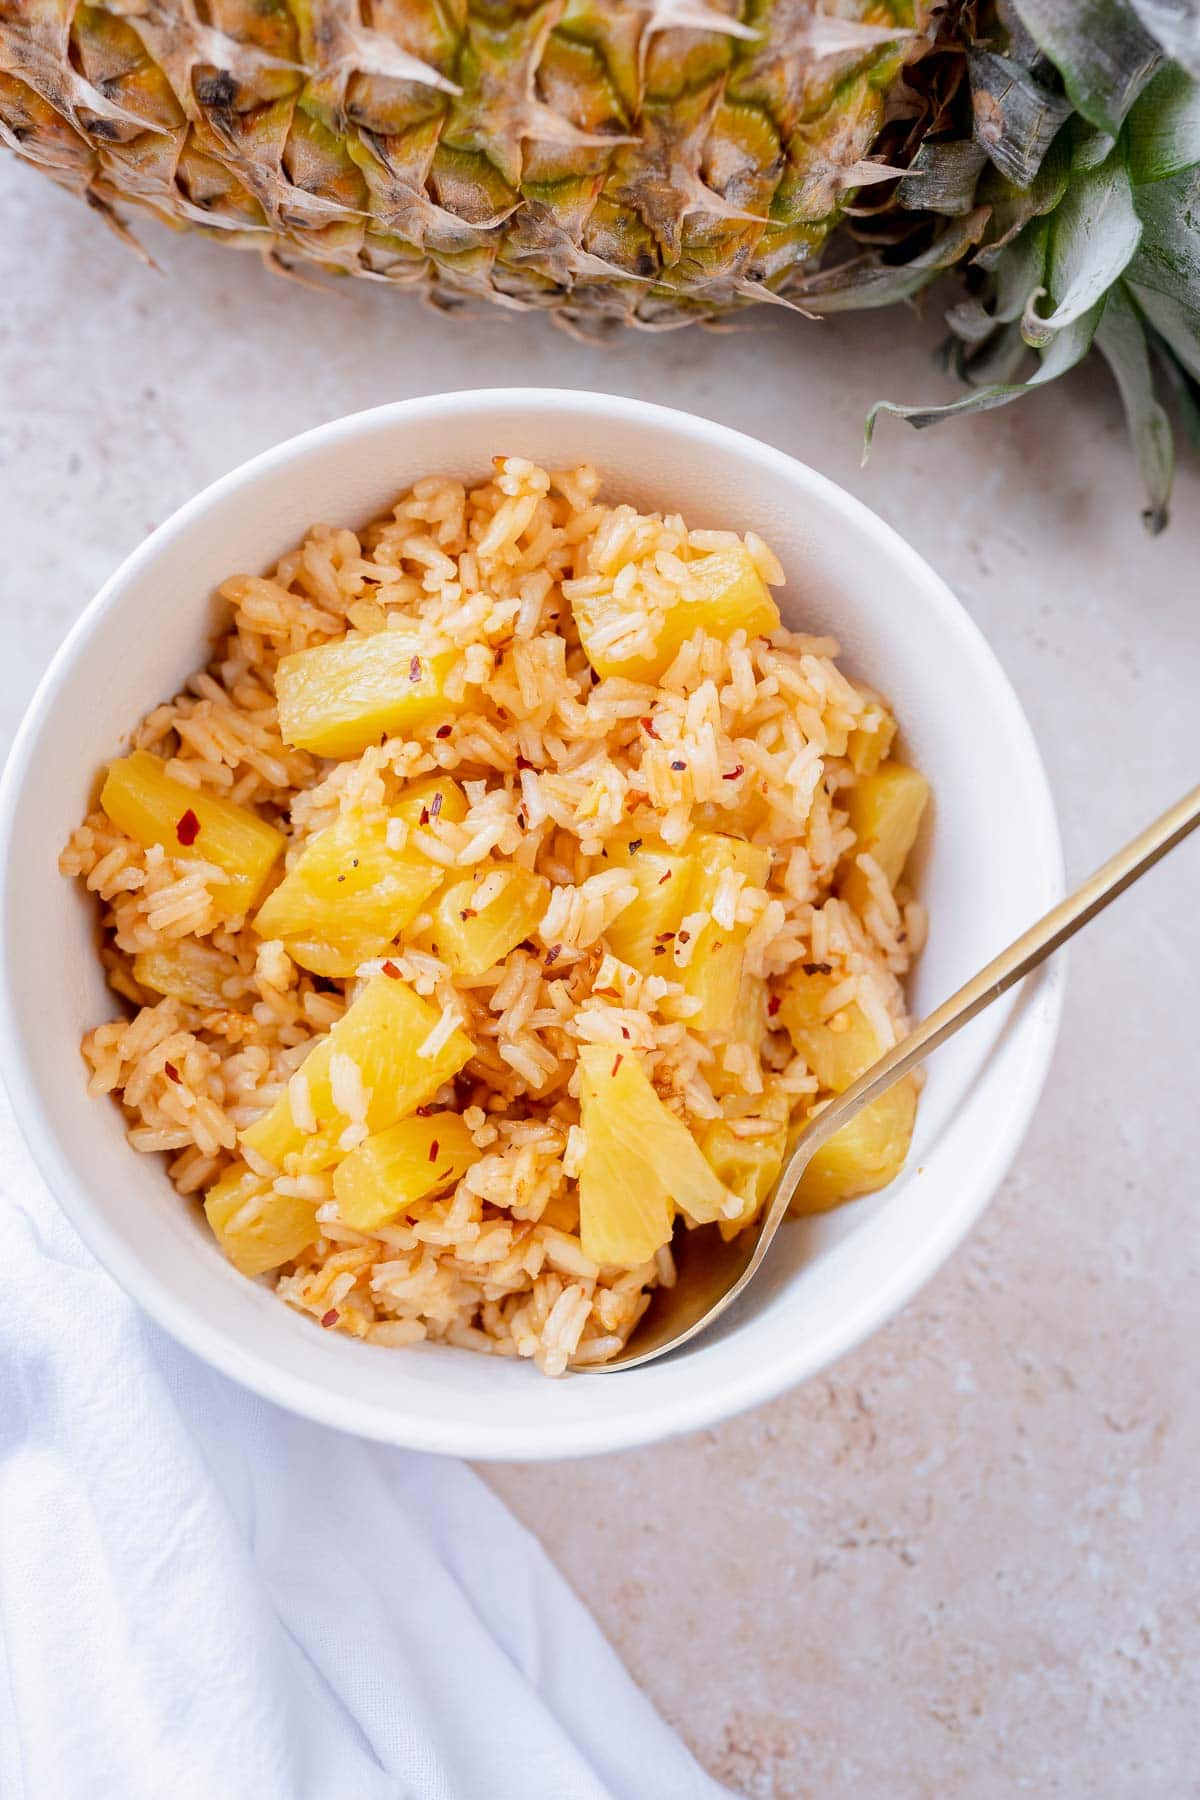 A golden spoon juts out of a white bowl filled with white rice, pineapple and red pepper flakes.